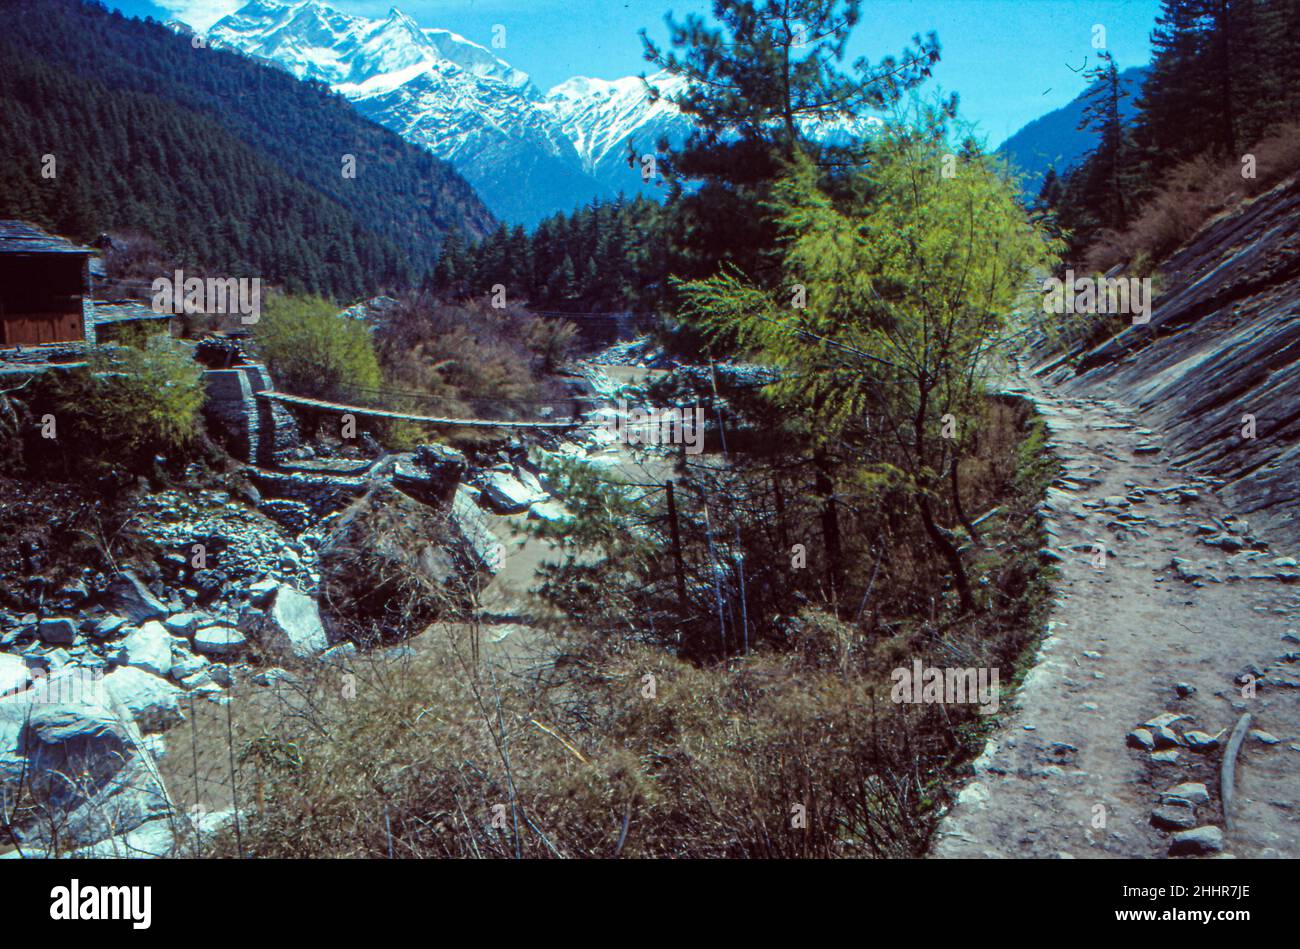 Hanging bridge and trail in Nepal in the Himalayas mountains Annapurna Circuit Trek Stock Photo